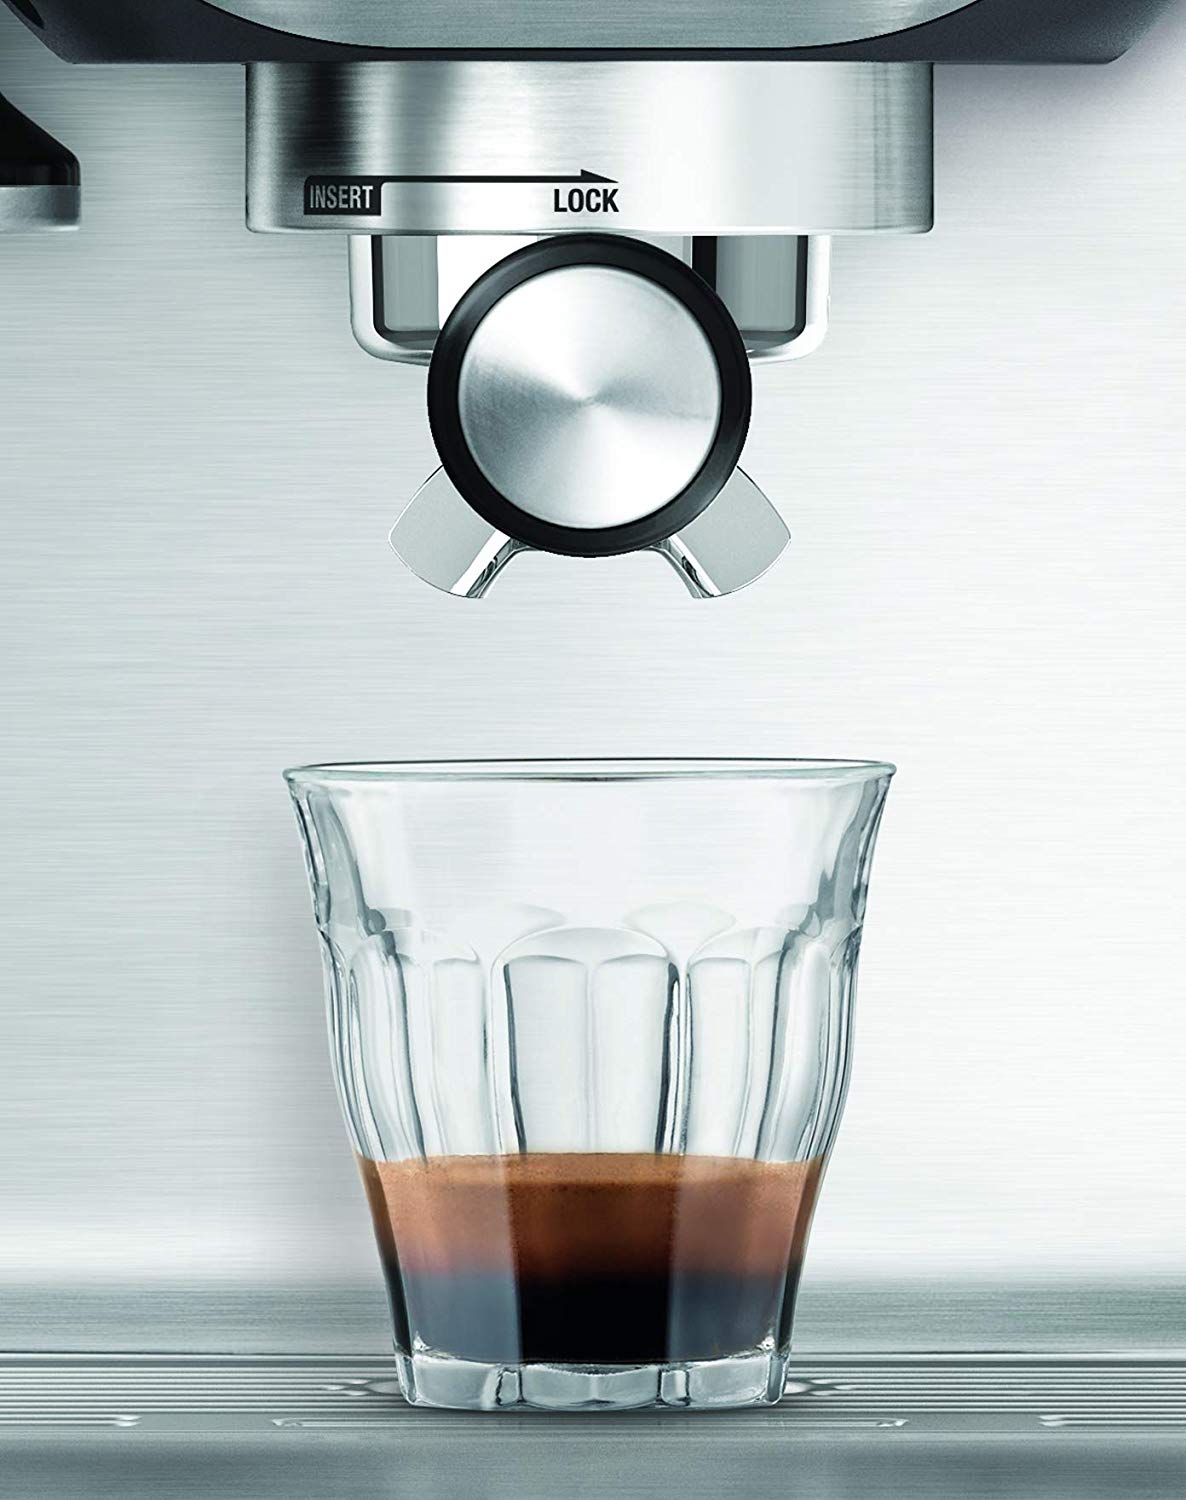 Breville Duo Temp Pro Espresso Machine,61 Fluid Ounces, Stainless Steel, BES810BSS - image 4 of 4